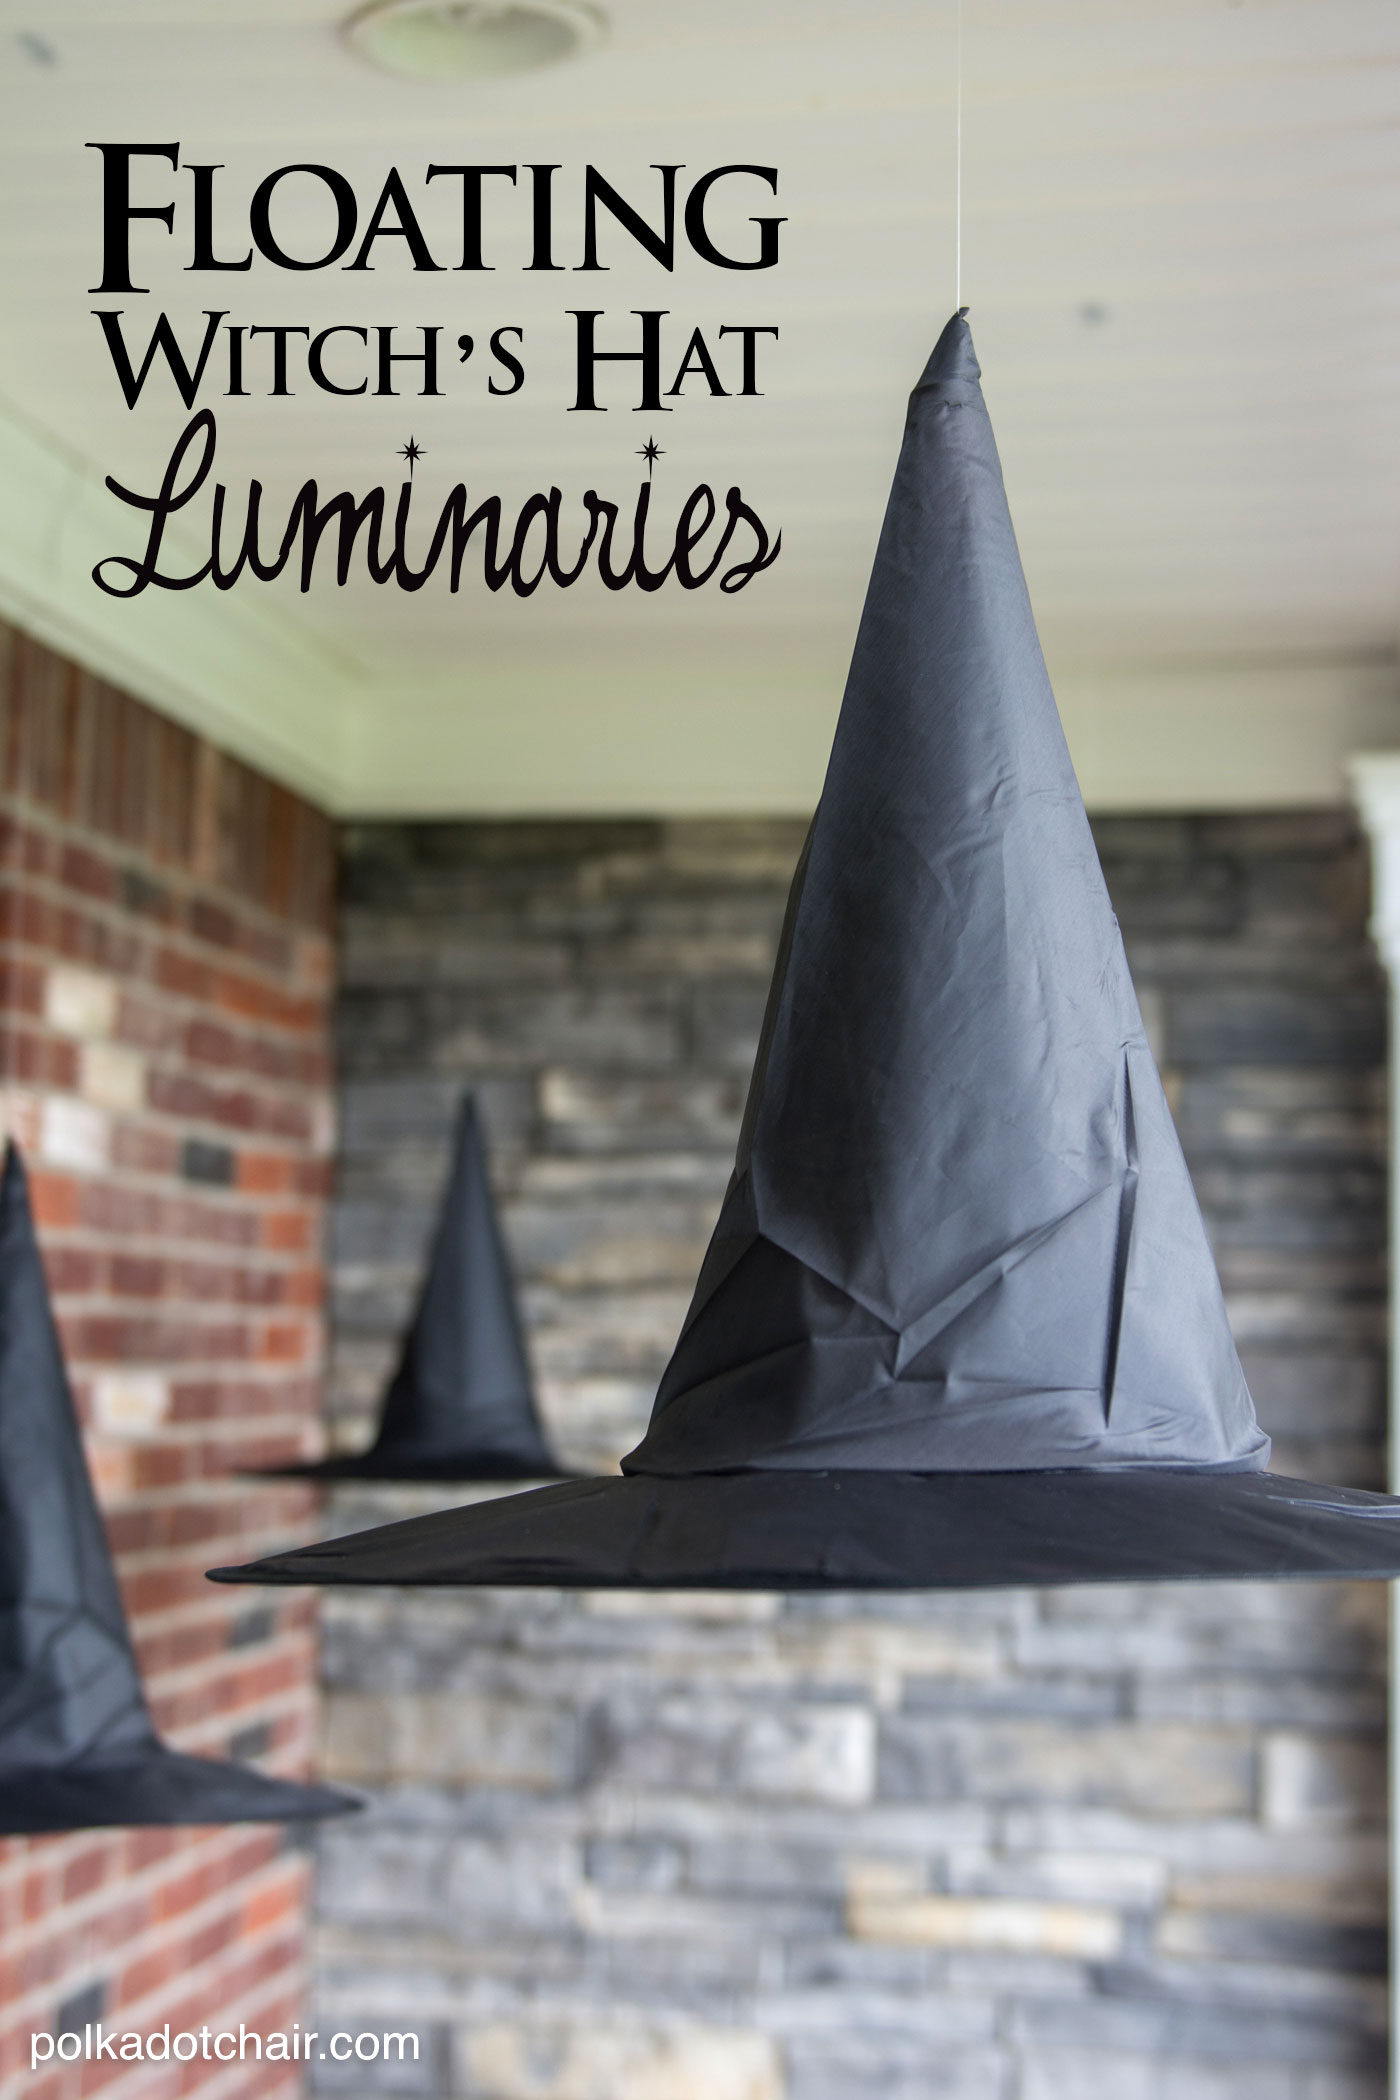 Halloween House Decorations - Floating Witch Hats